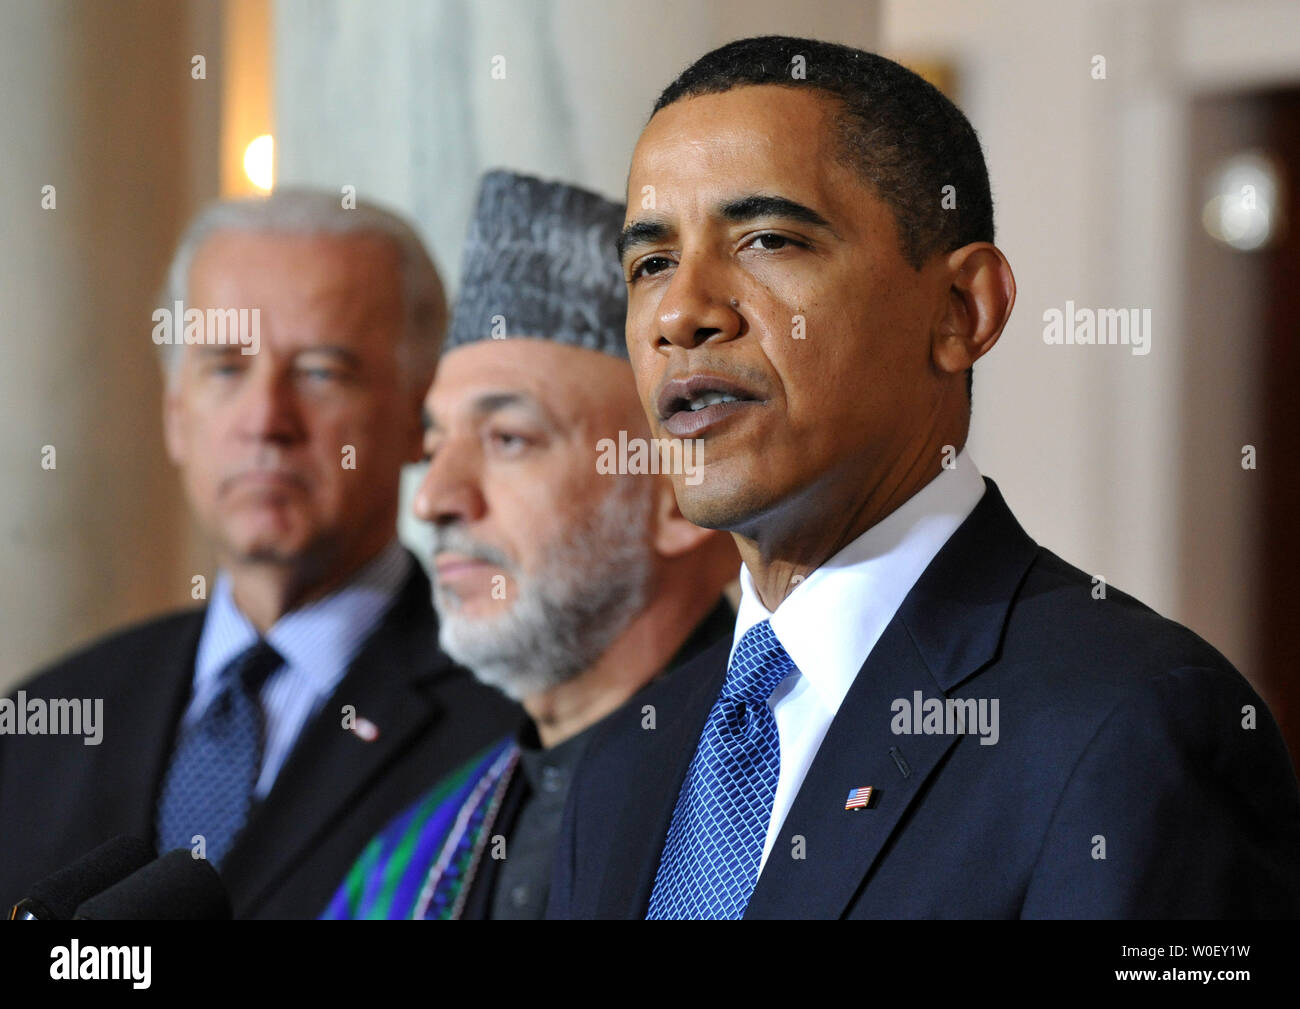 U.S. President Barack Obama (R) delivers remarks alongside Afghanistan President Hamid Karzai (C) and Vice President Joe Biden following a meeting with Karzai and Pakistan President Asif Ali Zardari (not pictured), in the Grad Foyer at the White House in Washington on May 6, 2009. (UPI Photo/Kevin Dietsch) Stock Photo